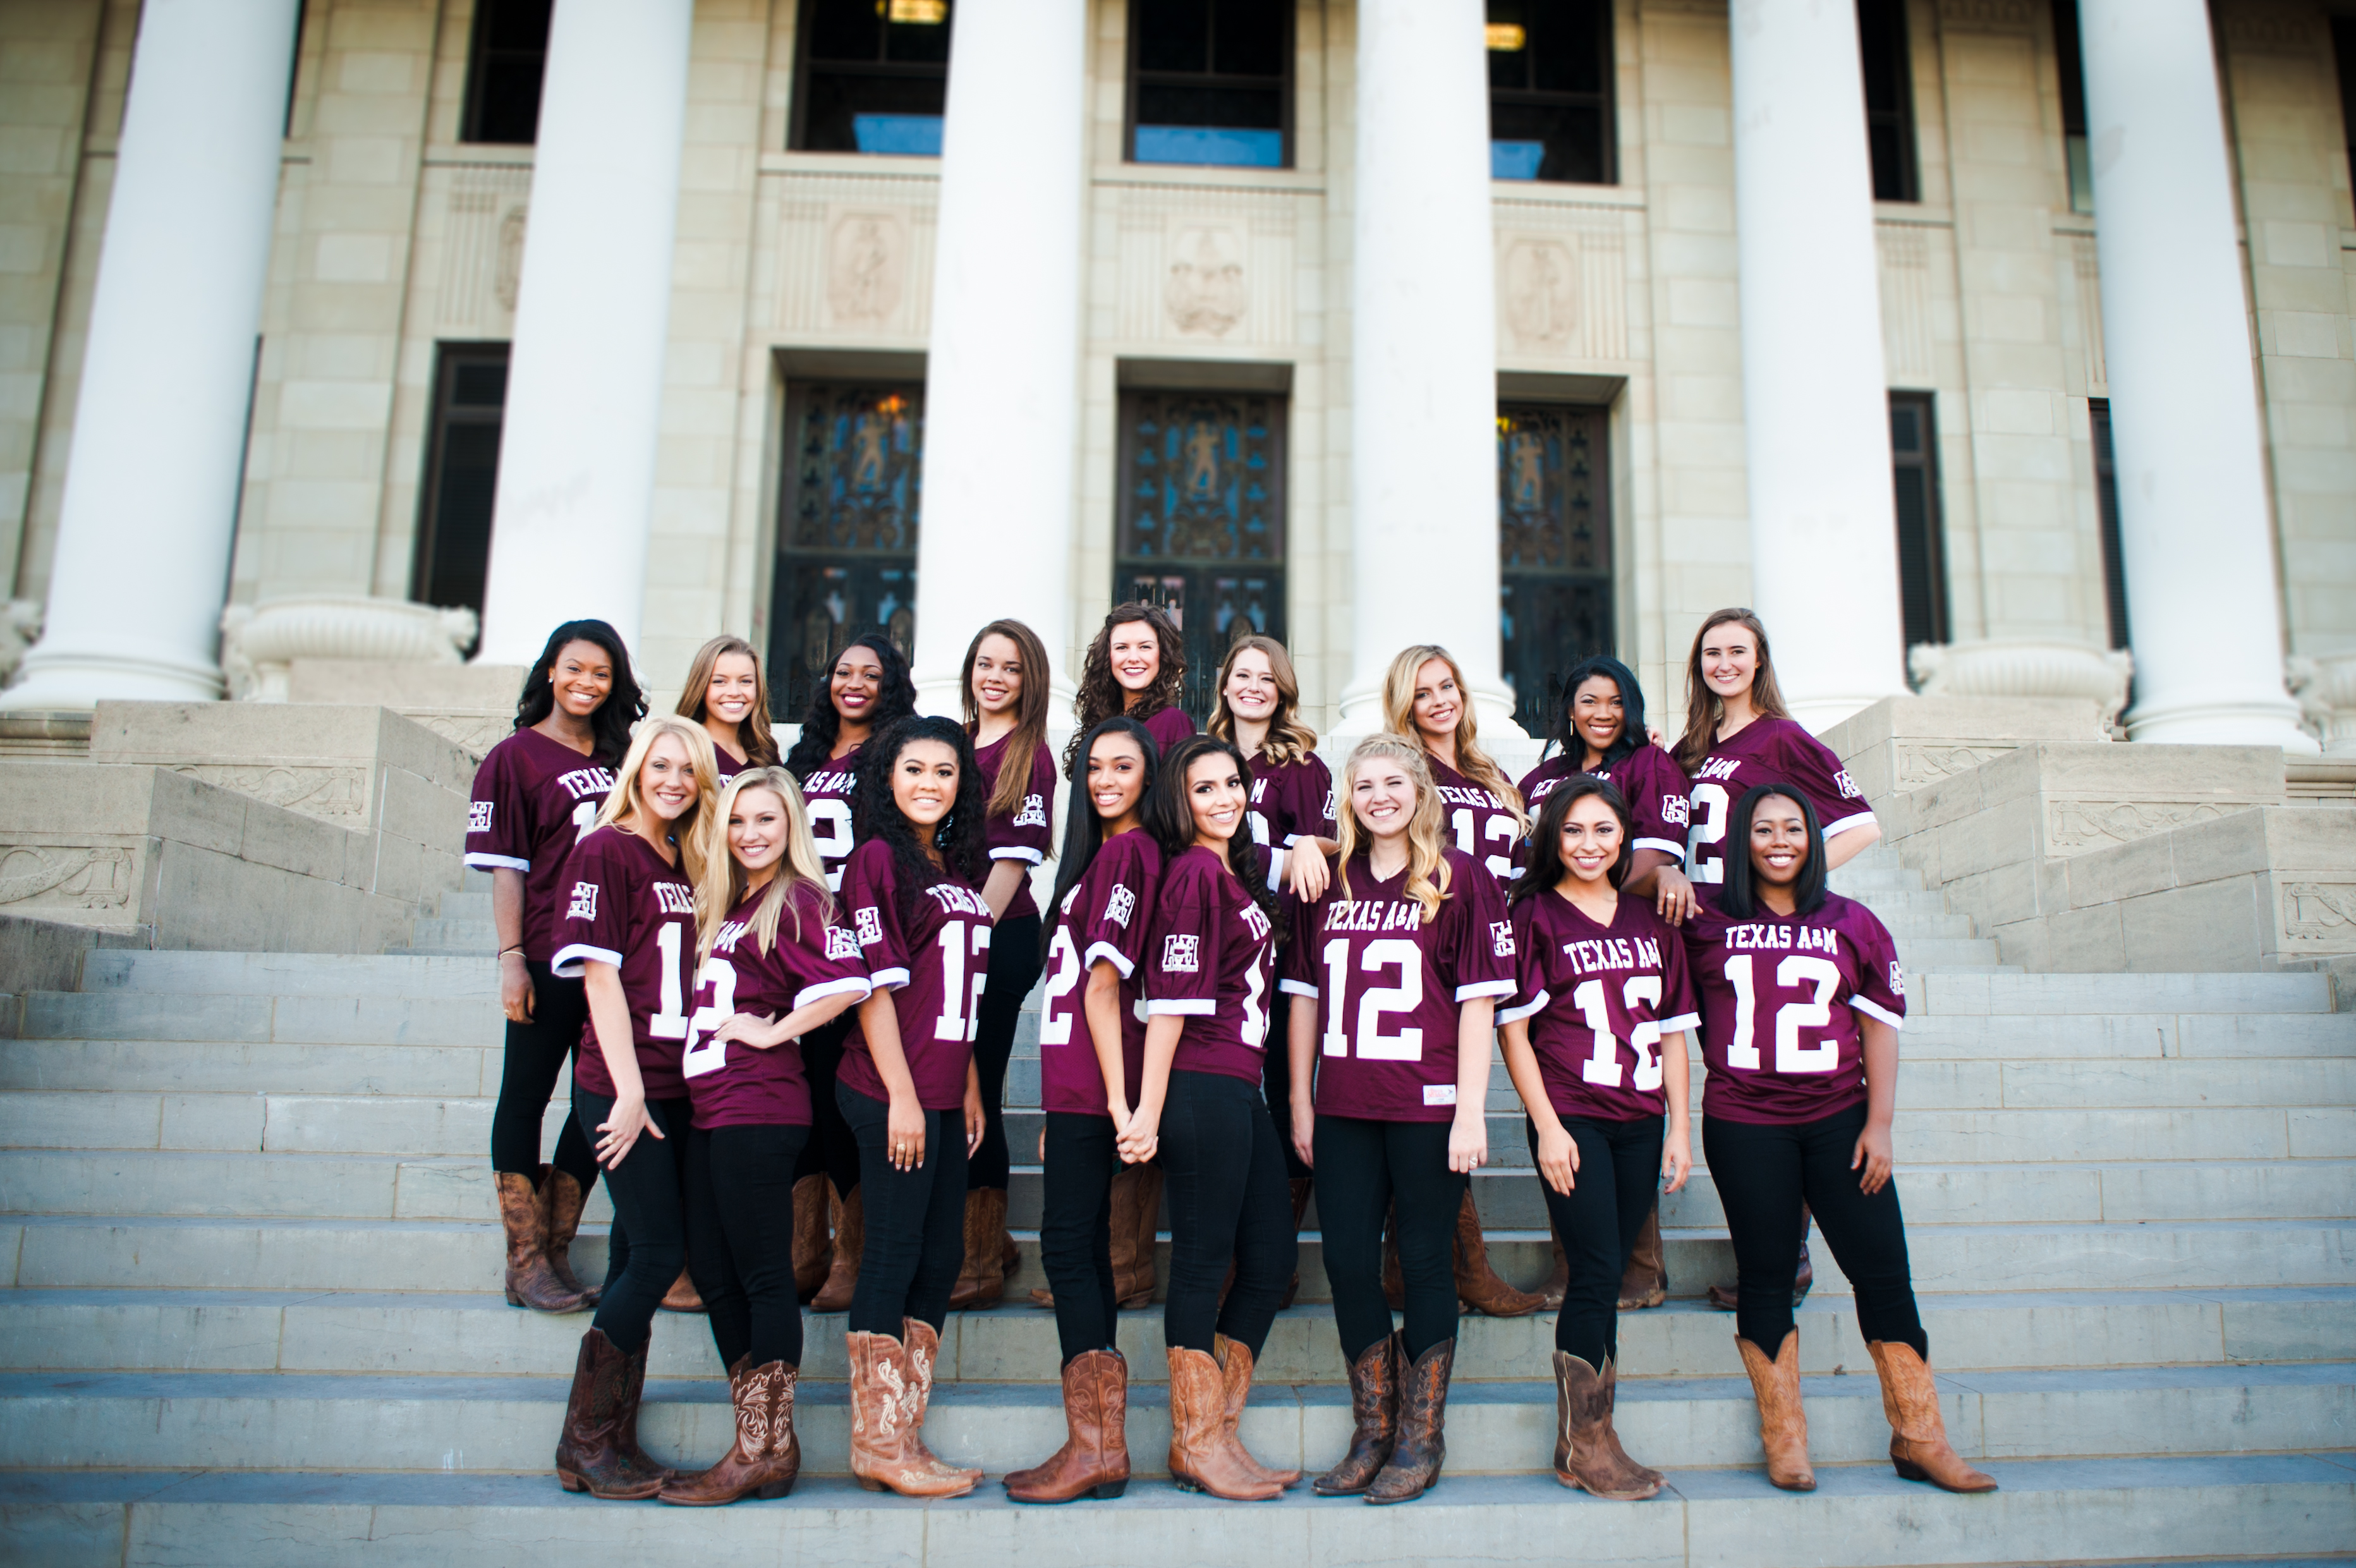 About | Aggie Hostesses3728 x 2481